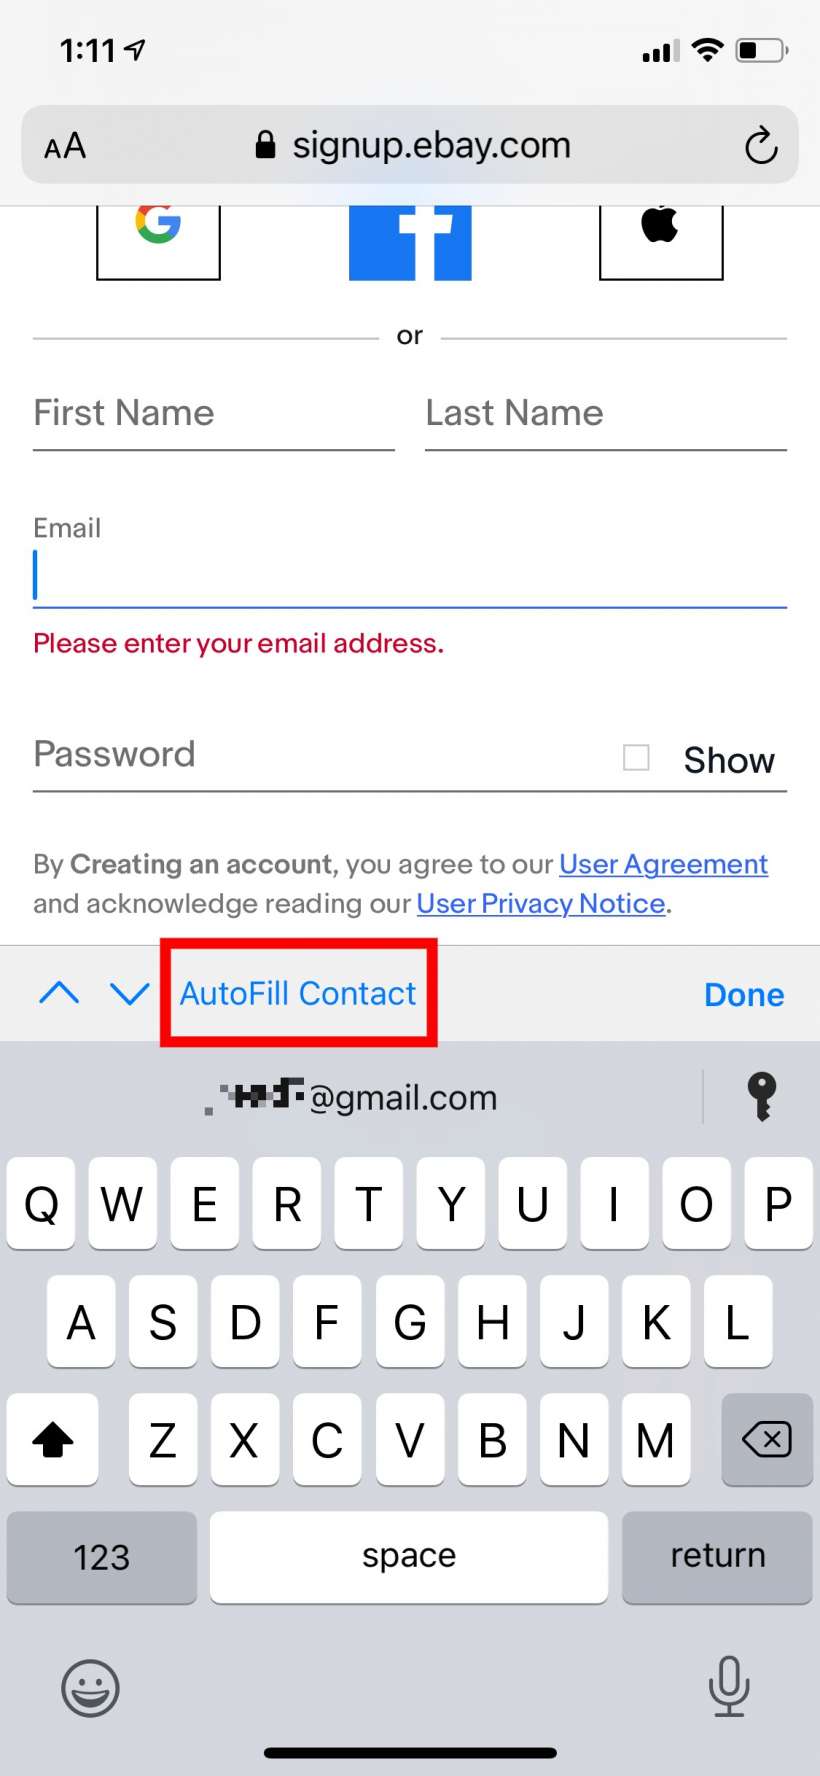 How to use more than one email address with autofill on iPhone and iPad.